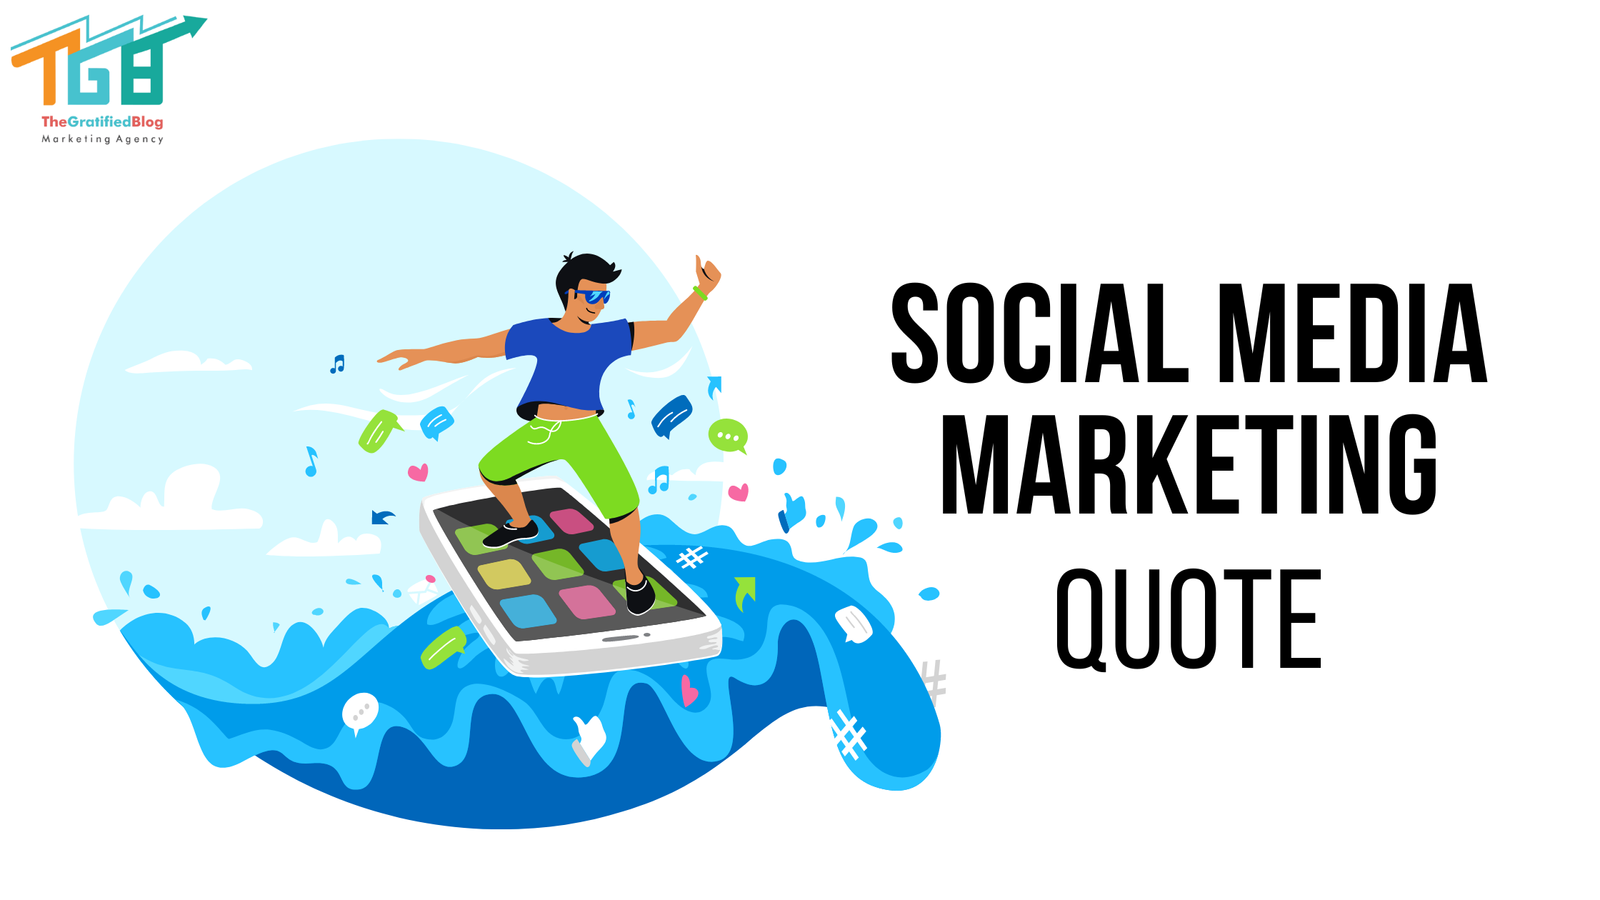 Quote About Social Media Marketing